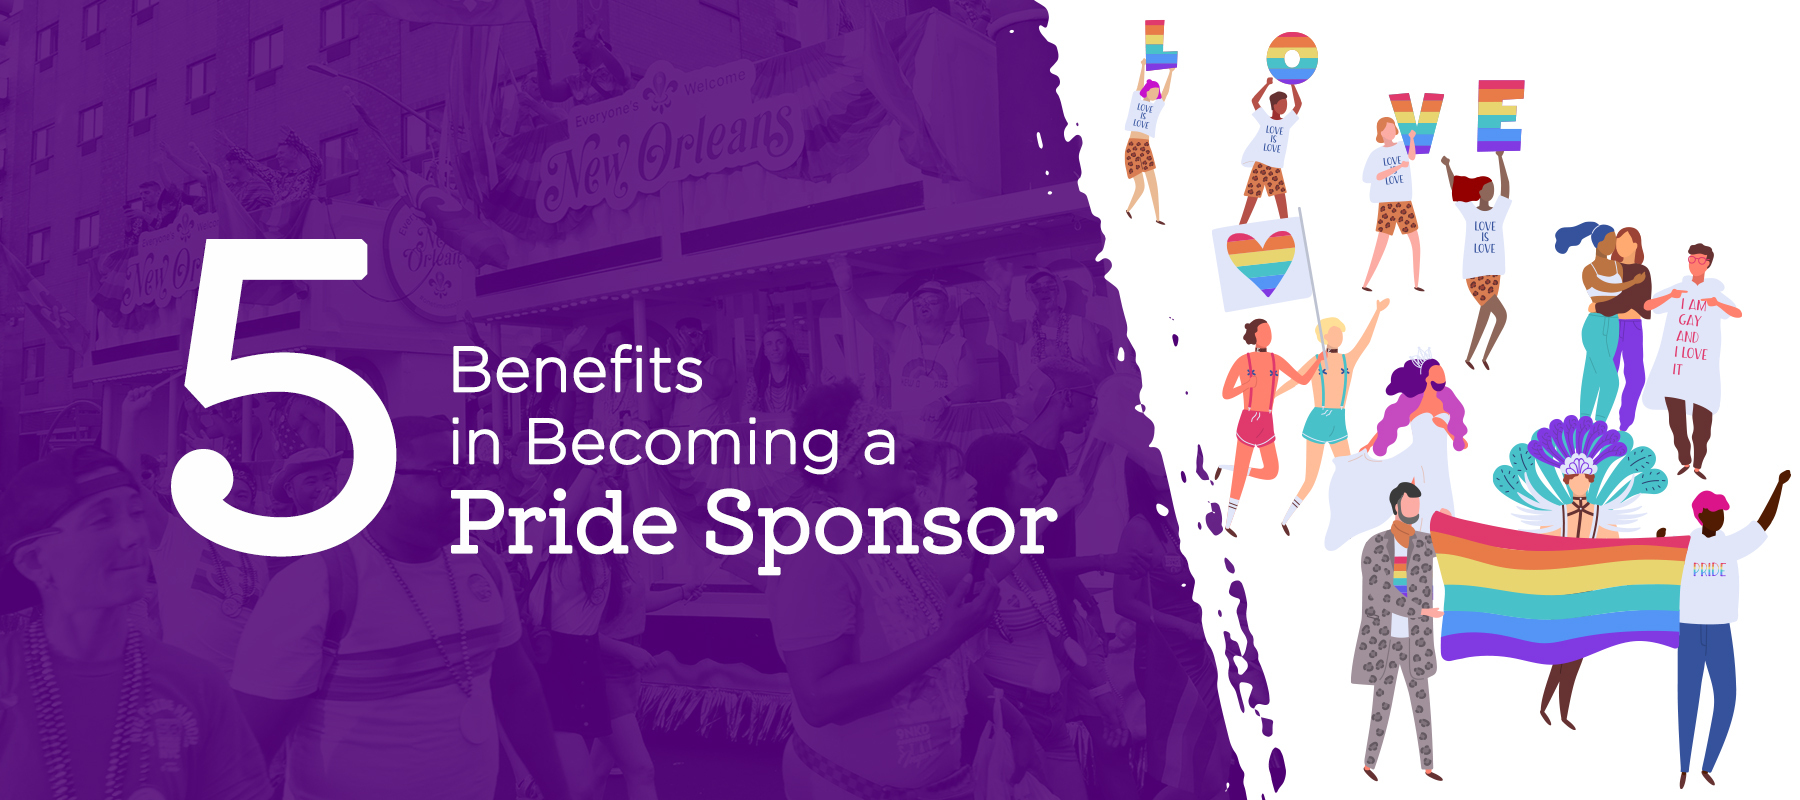 5 Benefits In Becoming a Pride Sponsor